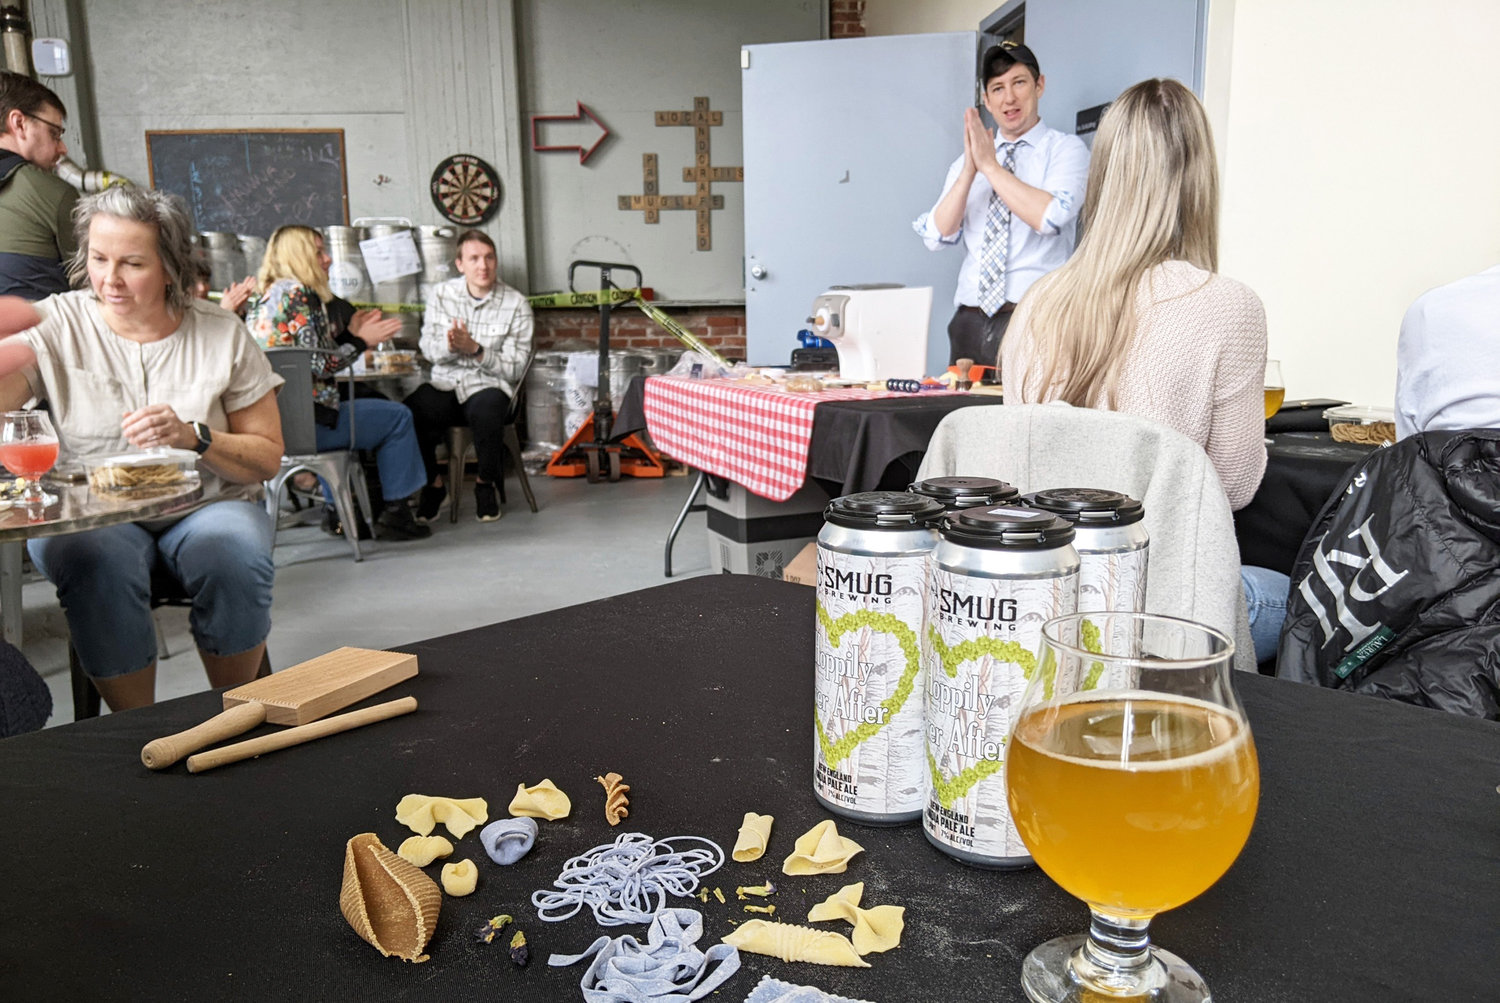 Newport Pasta Co. makes a stop at Smug Brewing Company for a hands-on workshop